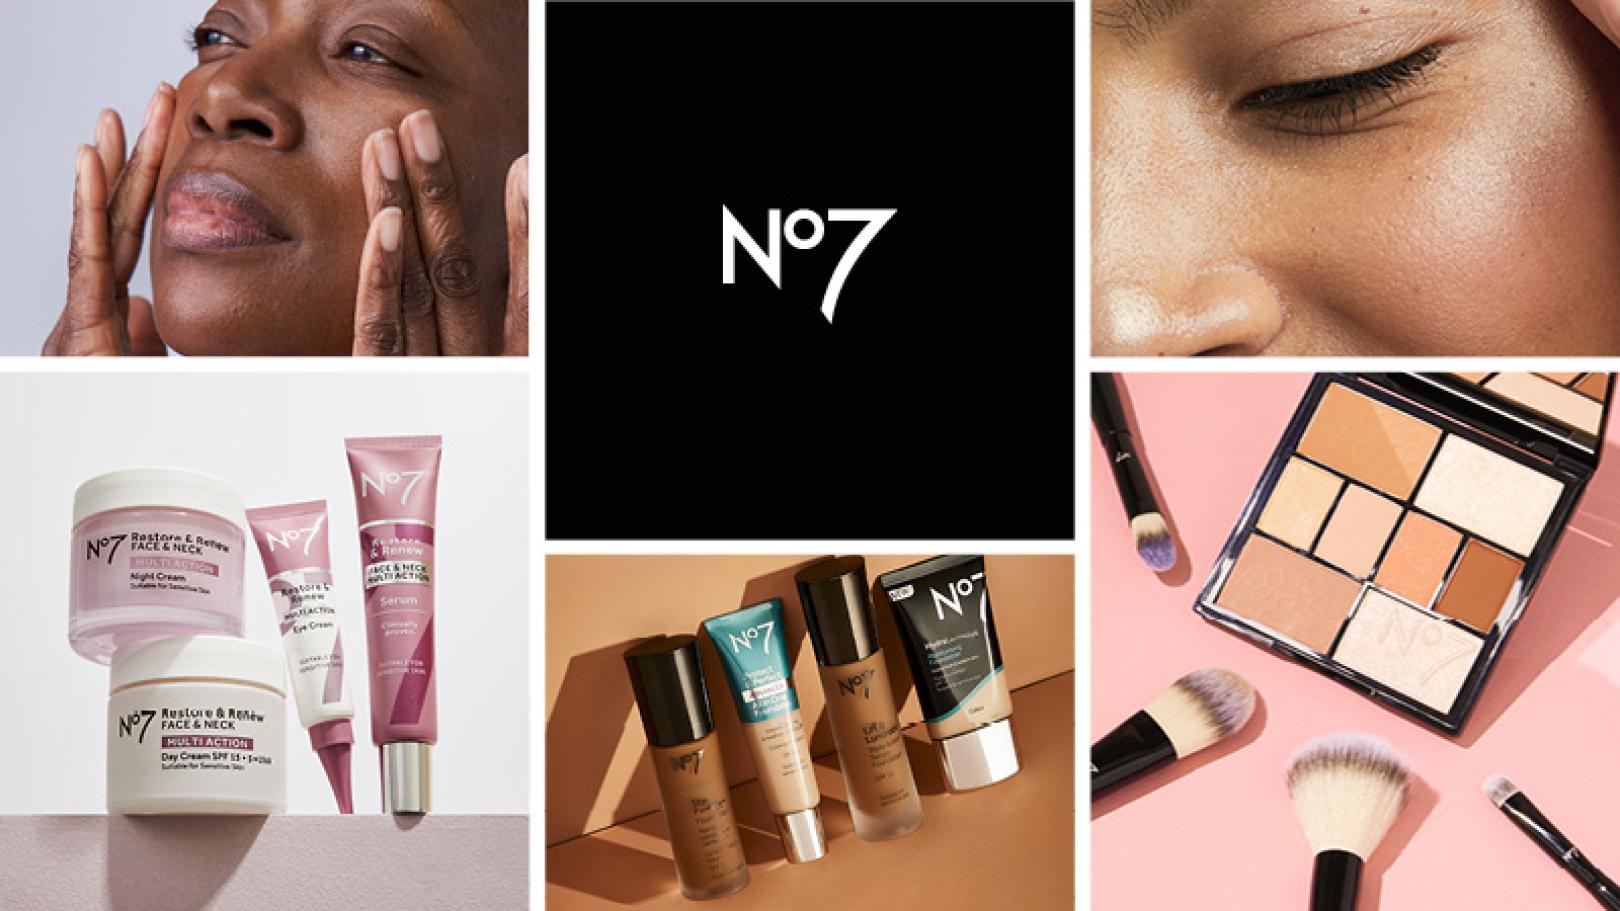 Grid image including No7 logo, models and product shots